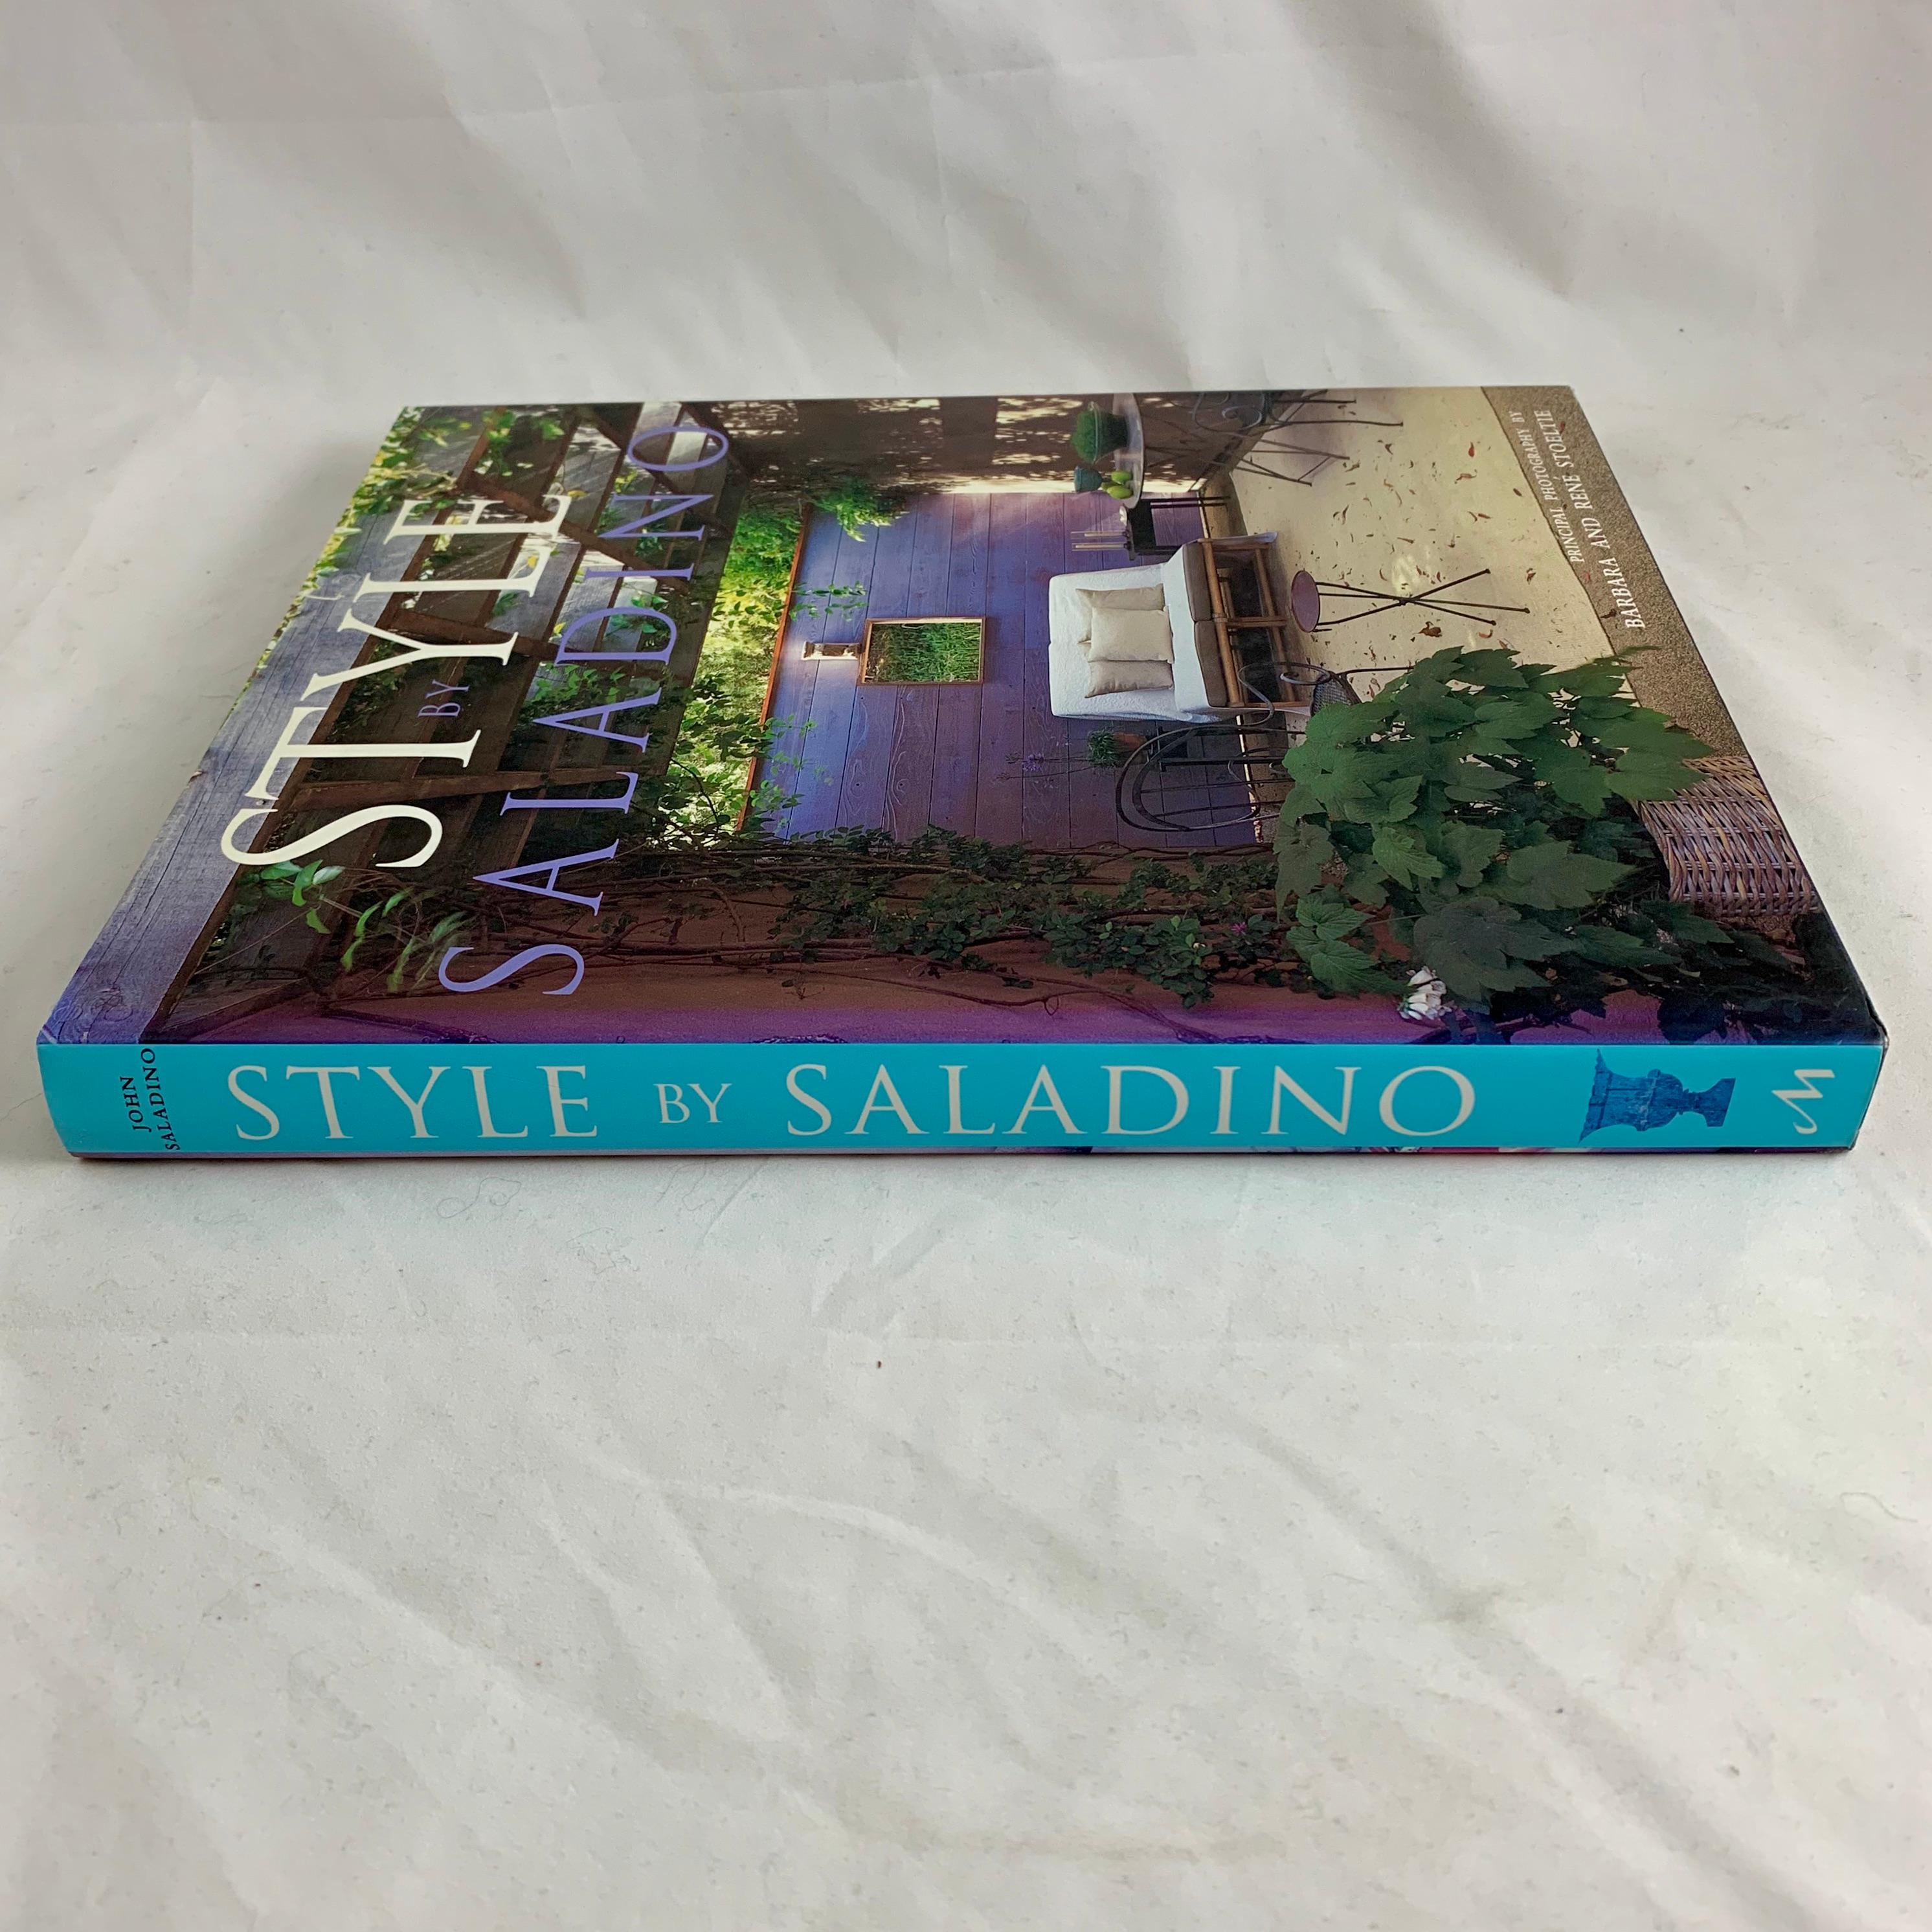 In the book ‘Style,’ John Saladino reveals the secrets that made him one of the world’s most respected interior designers. He discusses his design philosophy with its mastery of color, light and scale, borrowing from the classical world. Covering